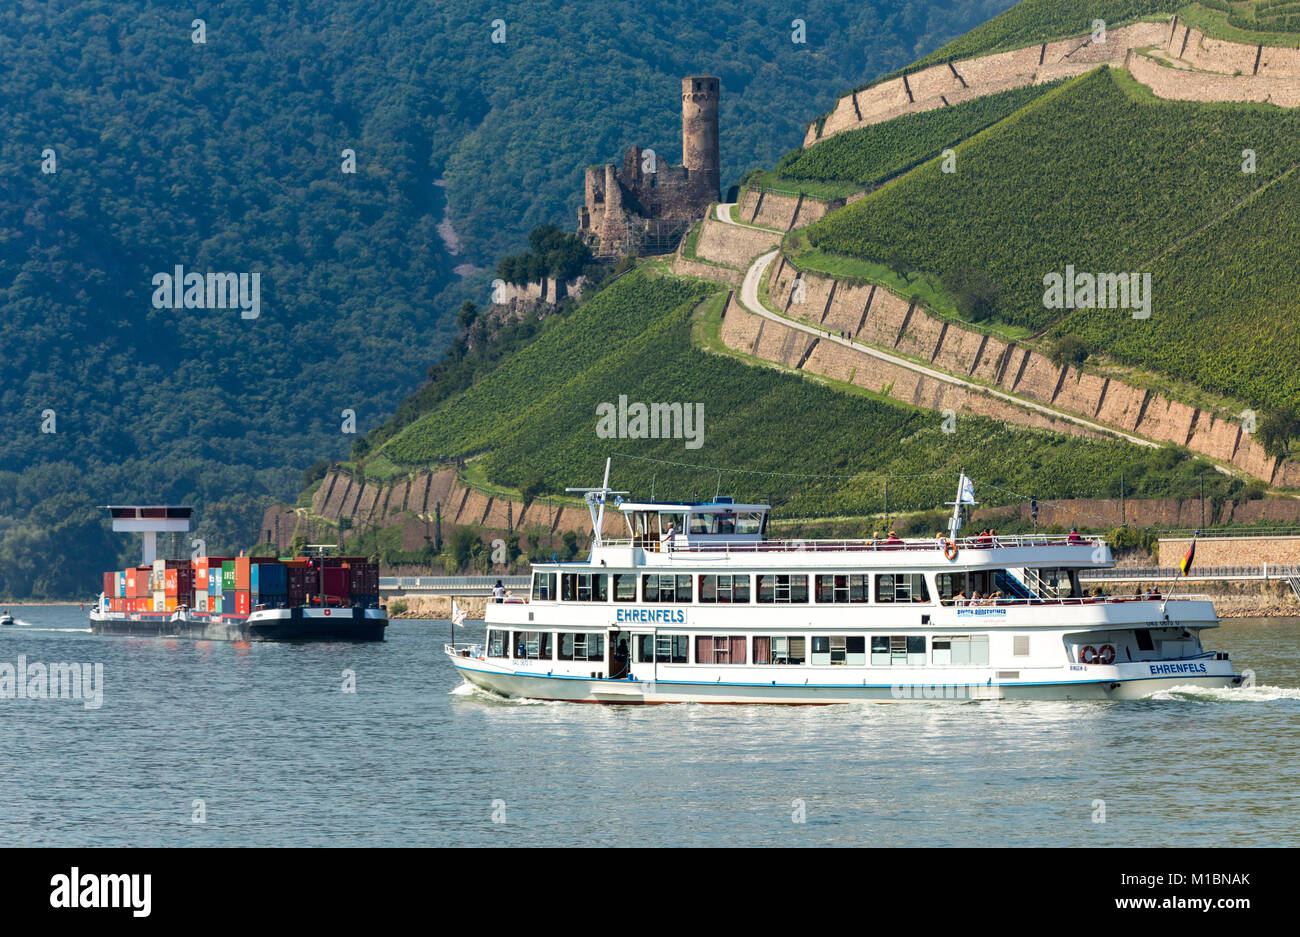 Ruin of Ehrenfels Castle in the Upper Middle Rhine Valley, vineyards near RŸdesheim, river cruise boat Ehrenfels, cargo ship, Stock Photo